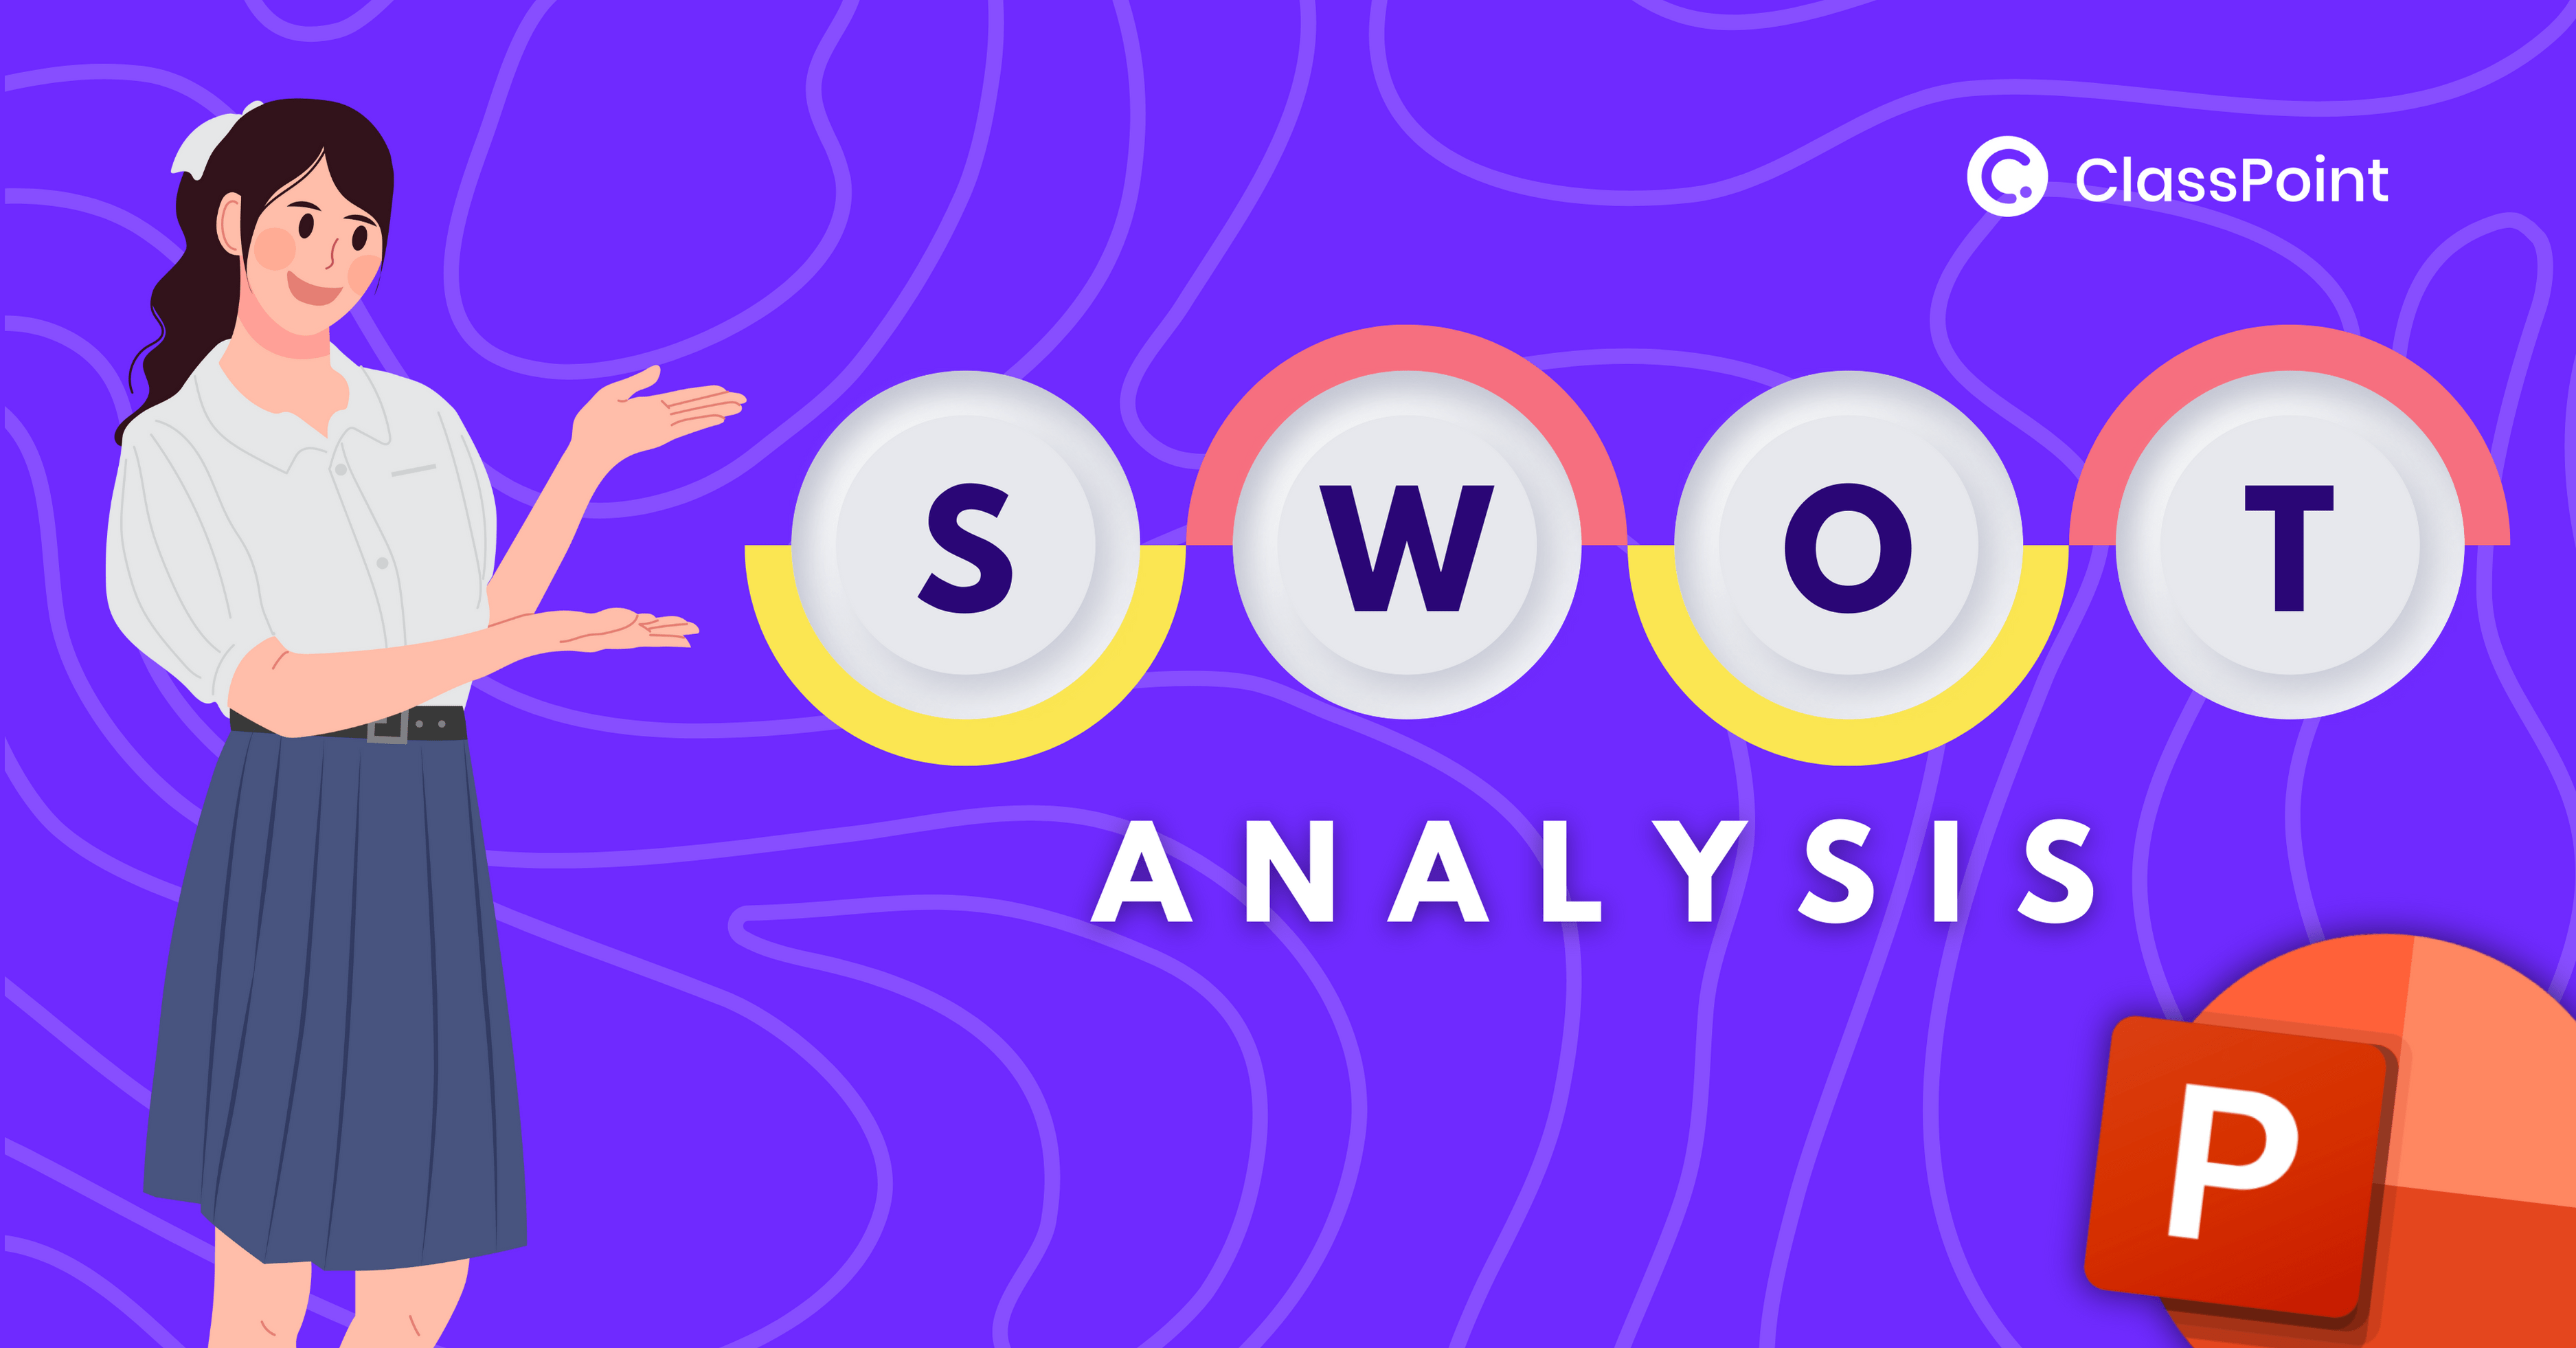 Creative SWOT Analysis PowerPoint Template That Will Leave Your Audience in Awe